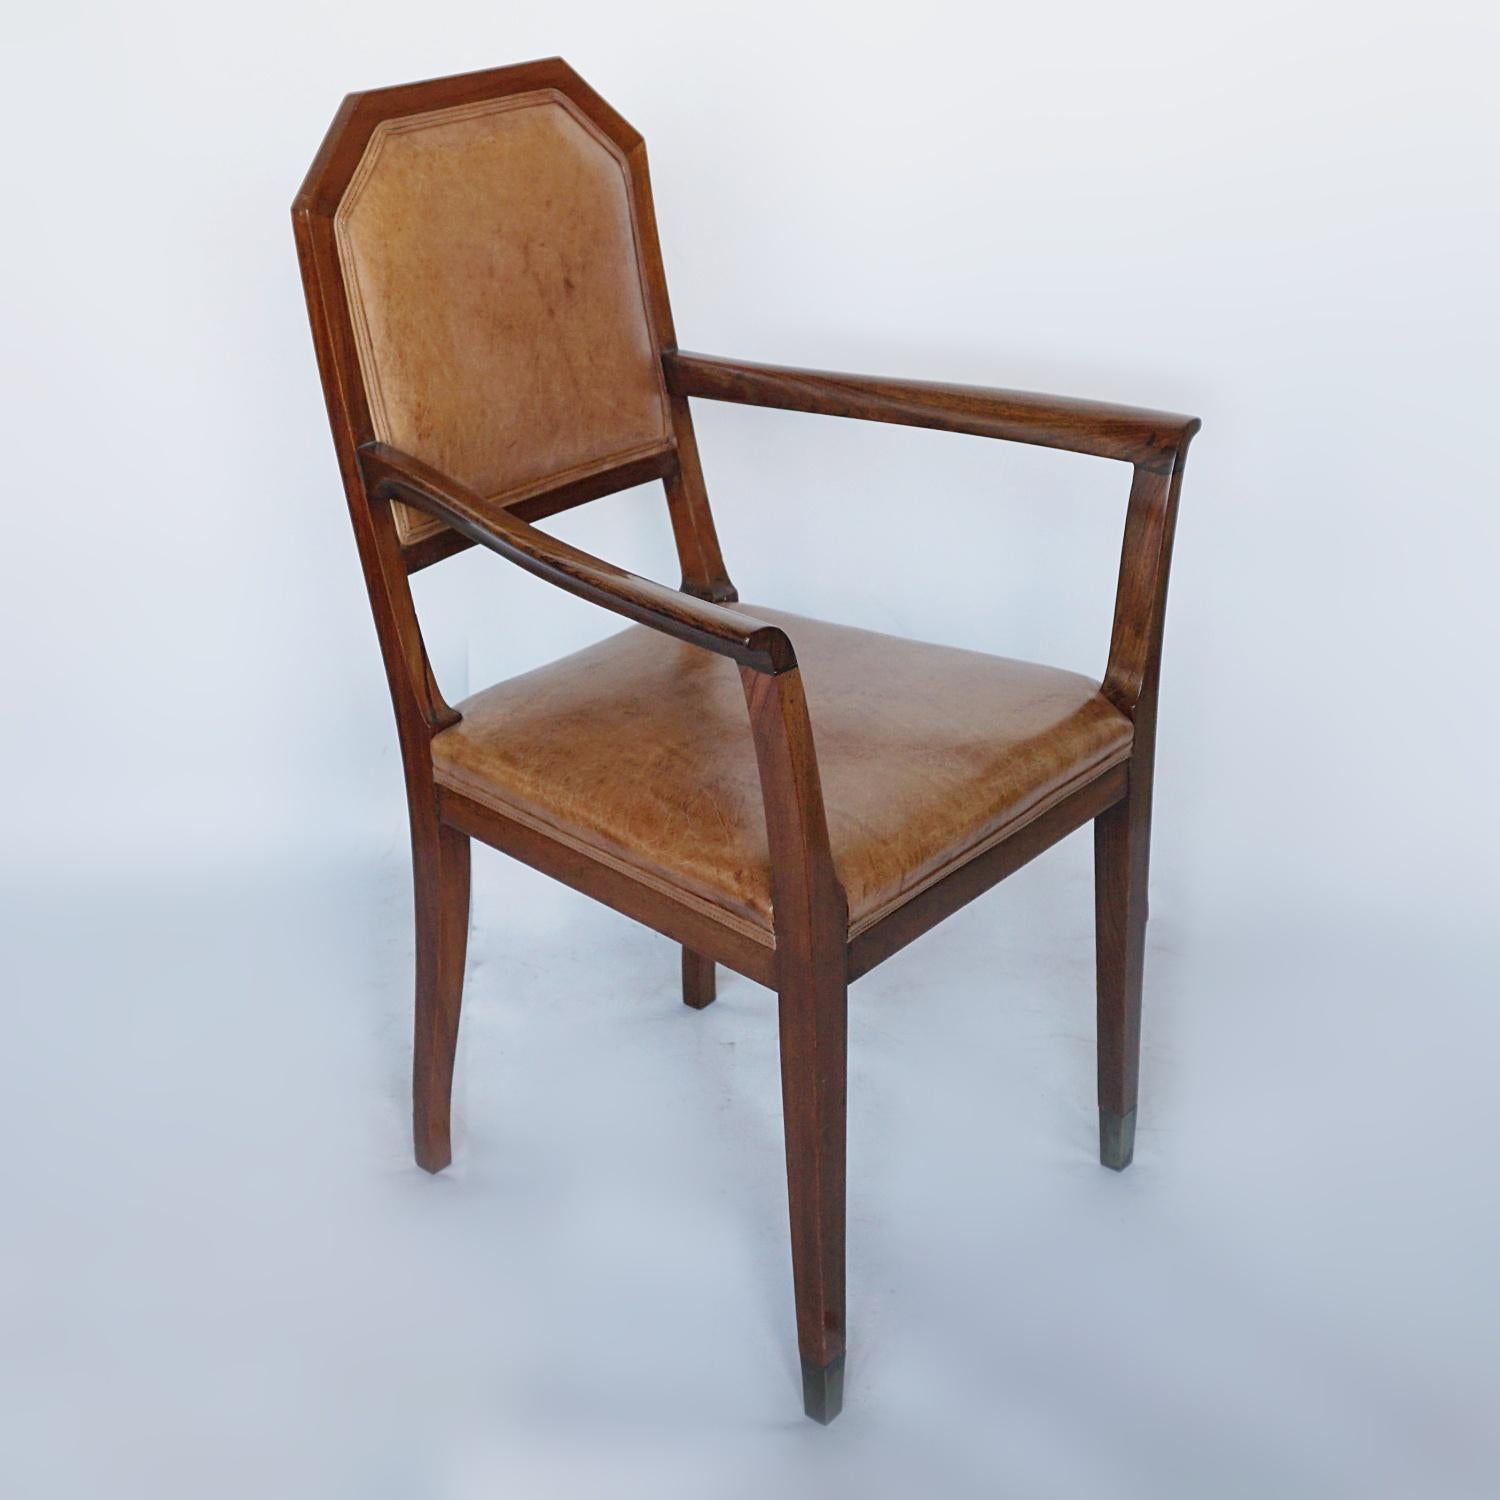 French Art Deco Desk Chair Walnut and Leather, Circa 1925 1